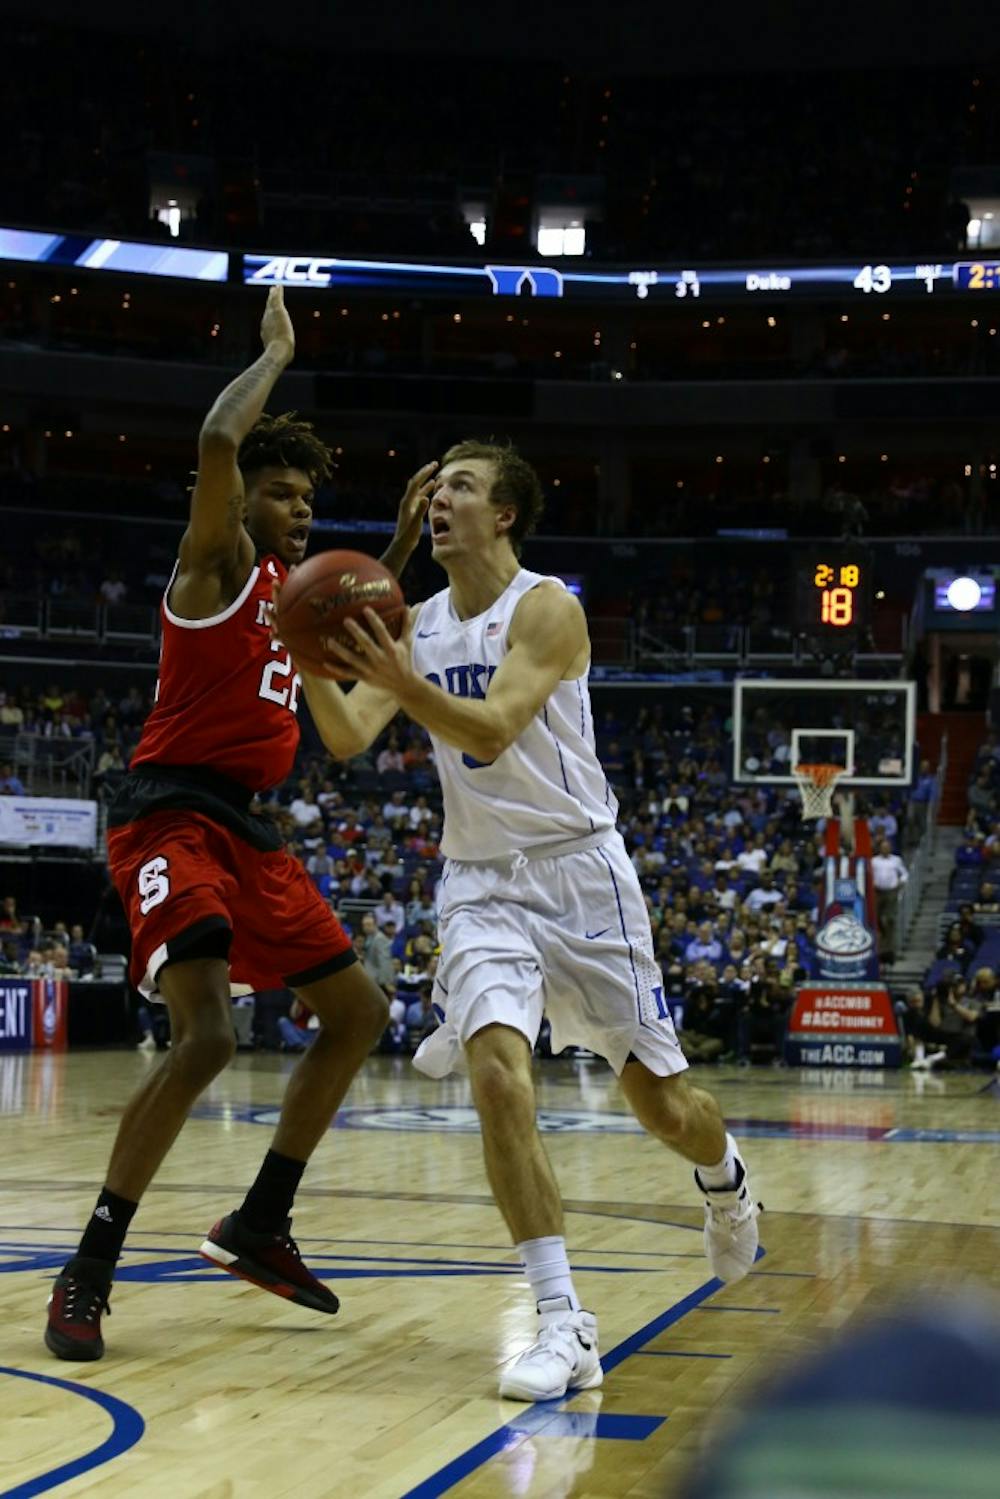 Freshman Luke Kennard started for Derryck Thornton against N.C. State and had 22 points.